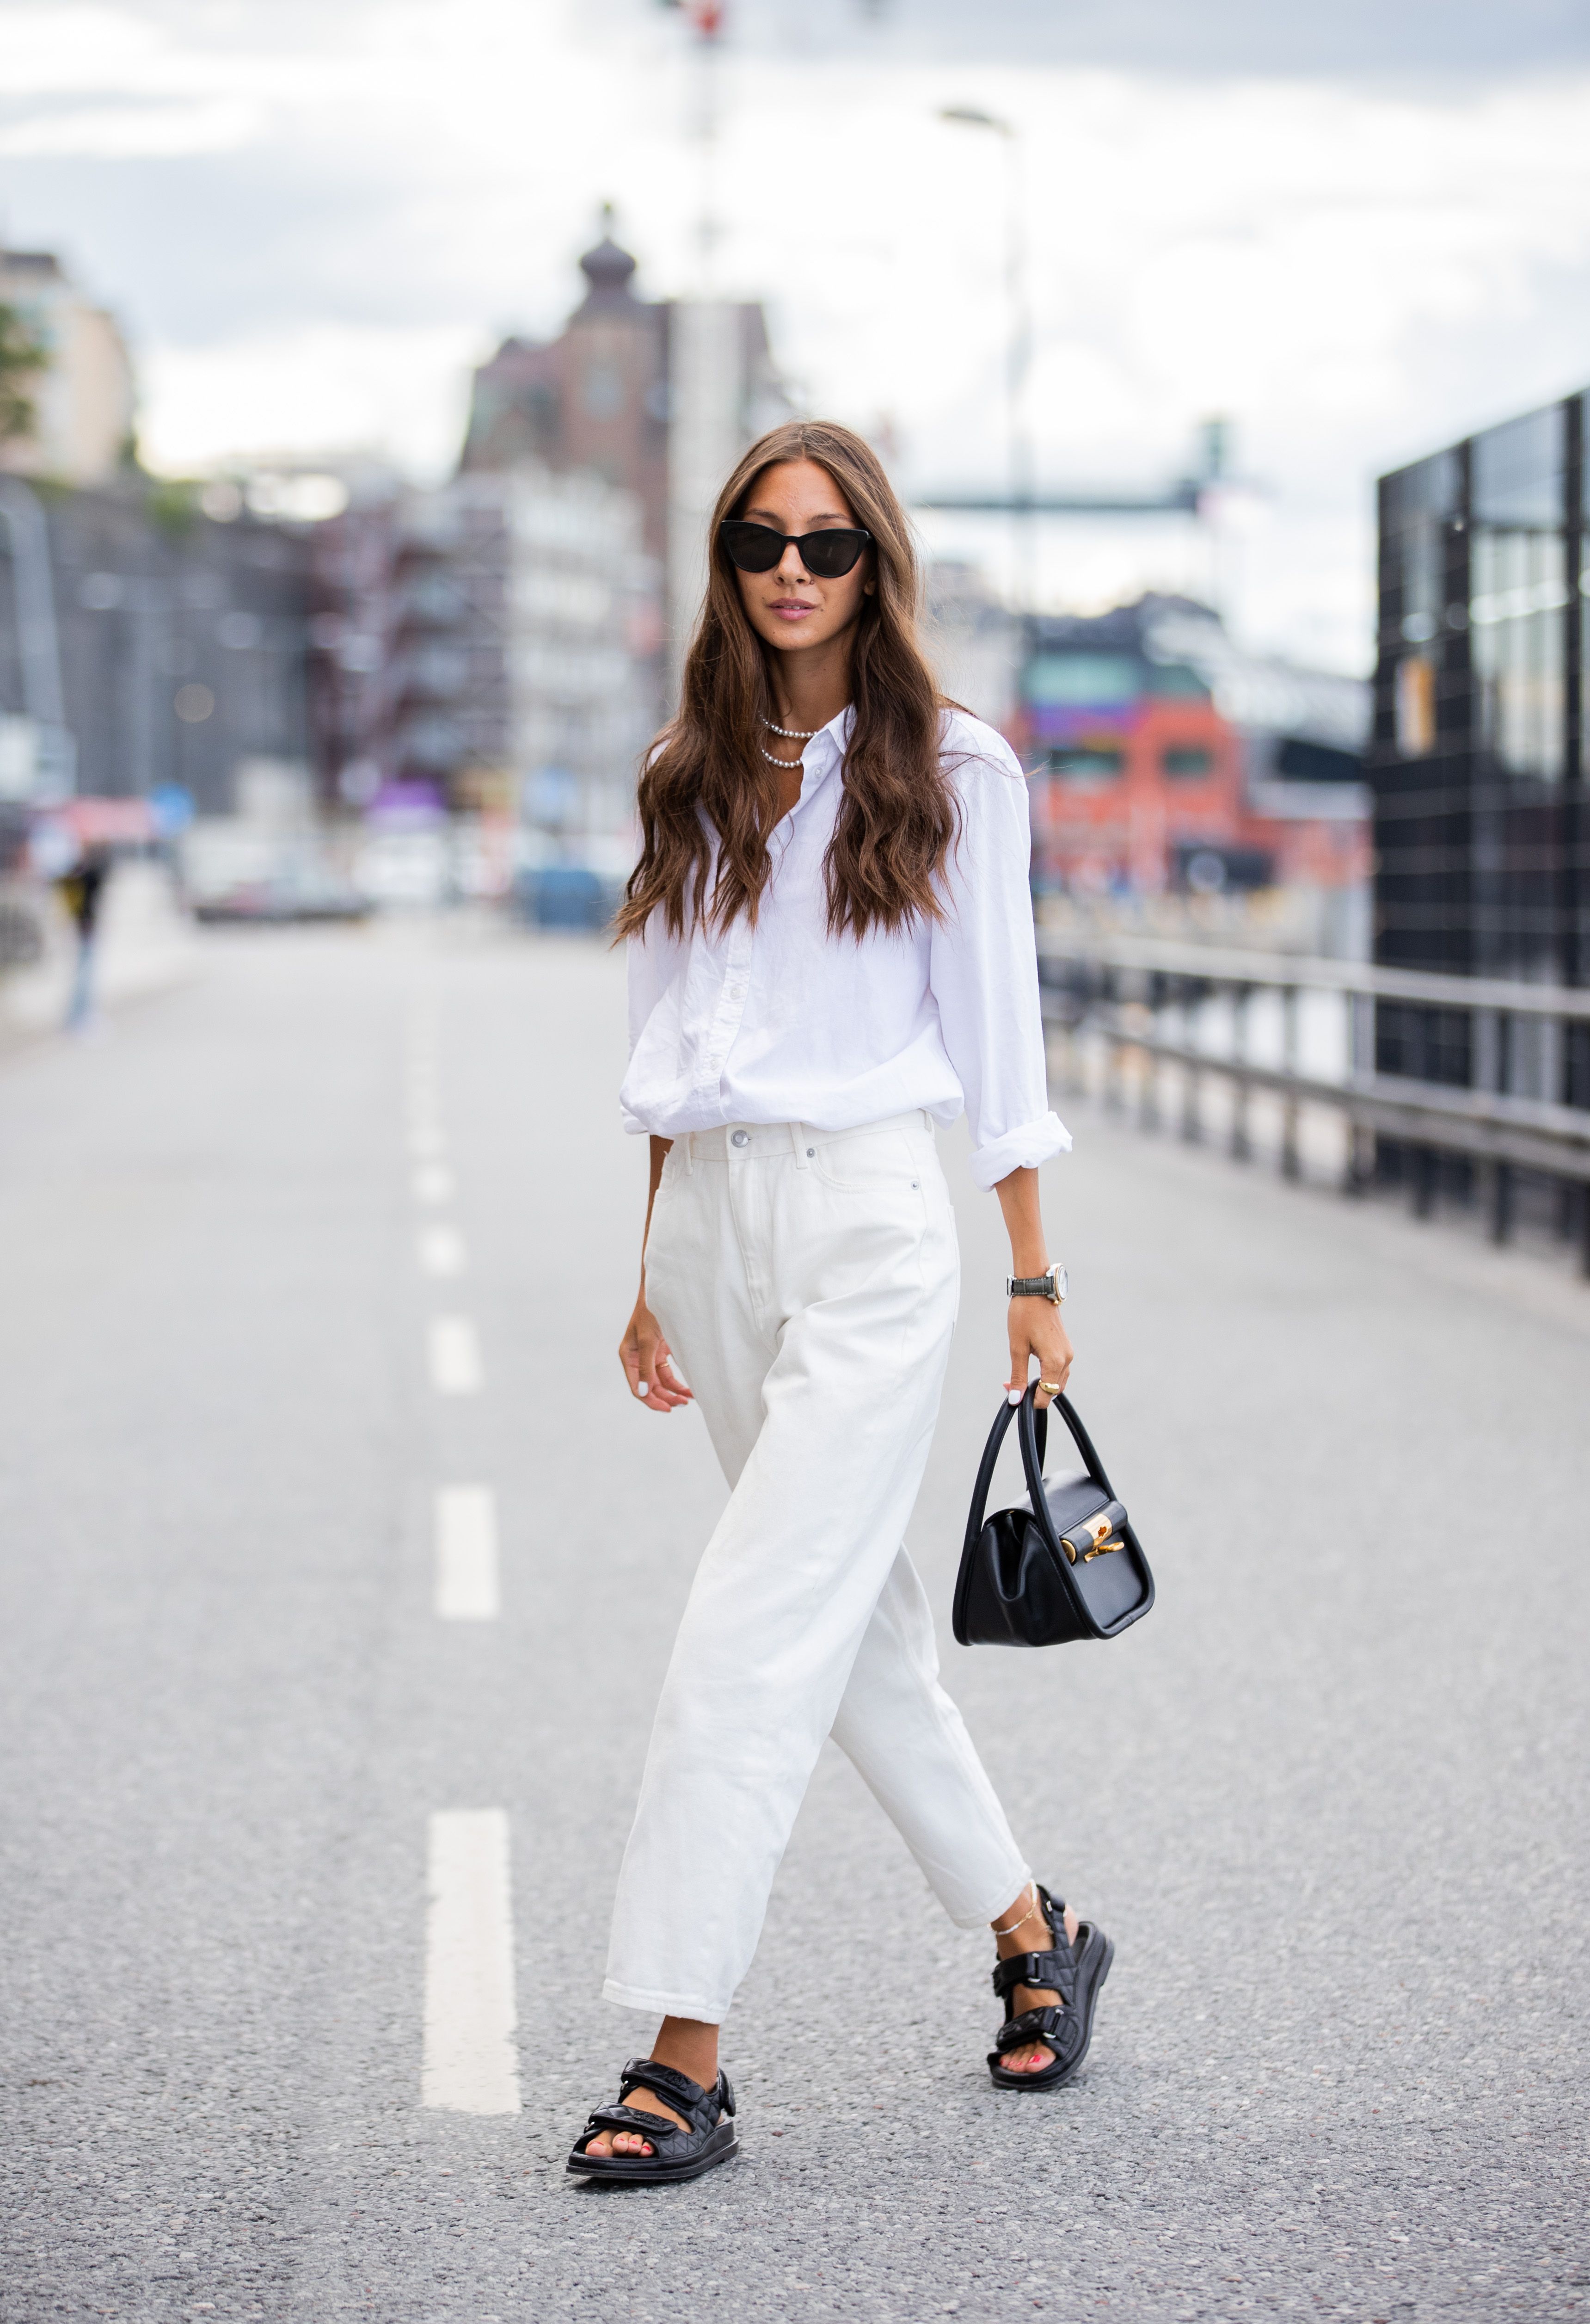 10 Ways To Wear A White Shirt - The Glossychic  Office outfits, Casual work  outfits, Spring outfits